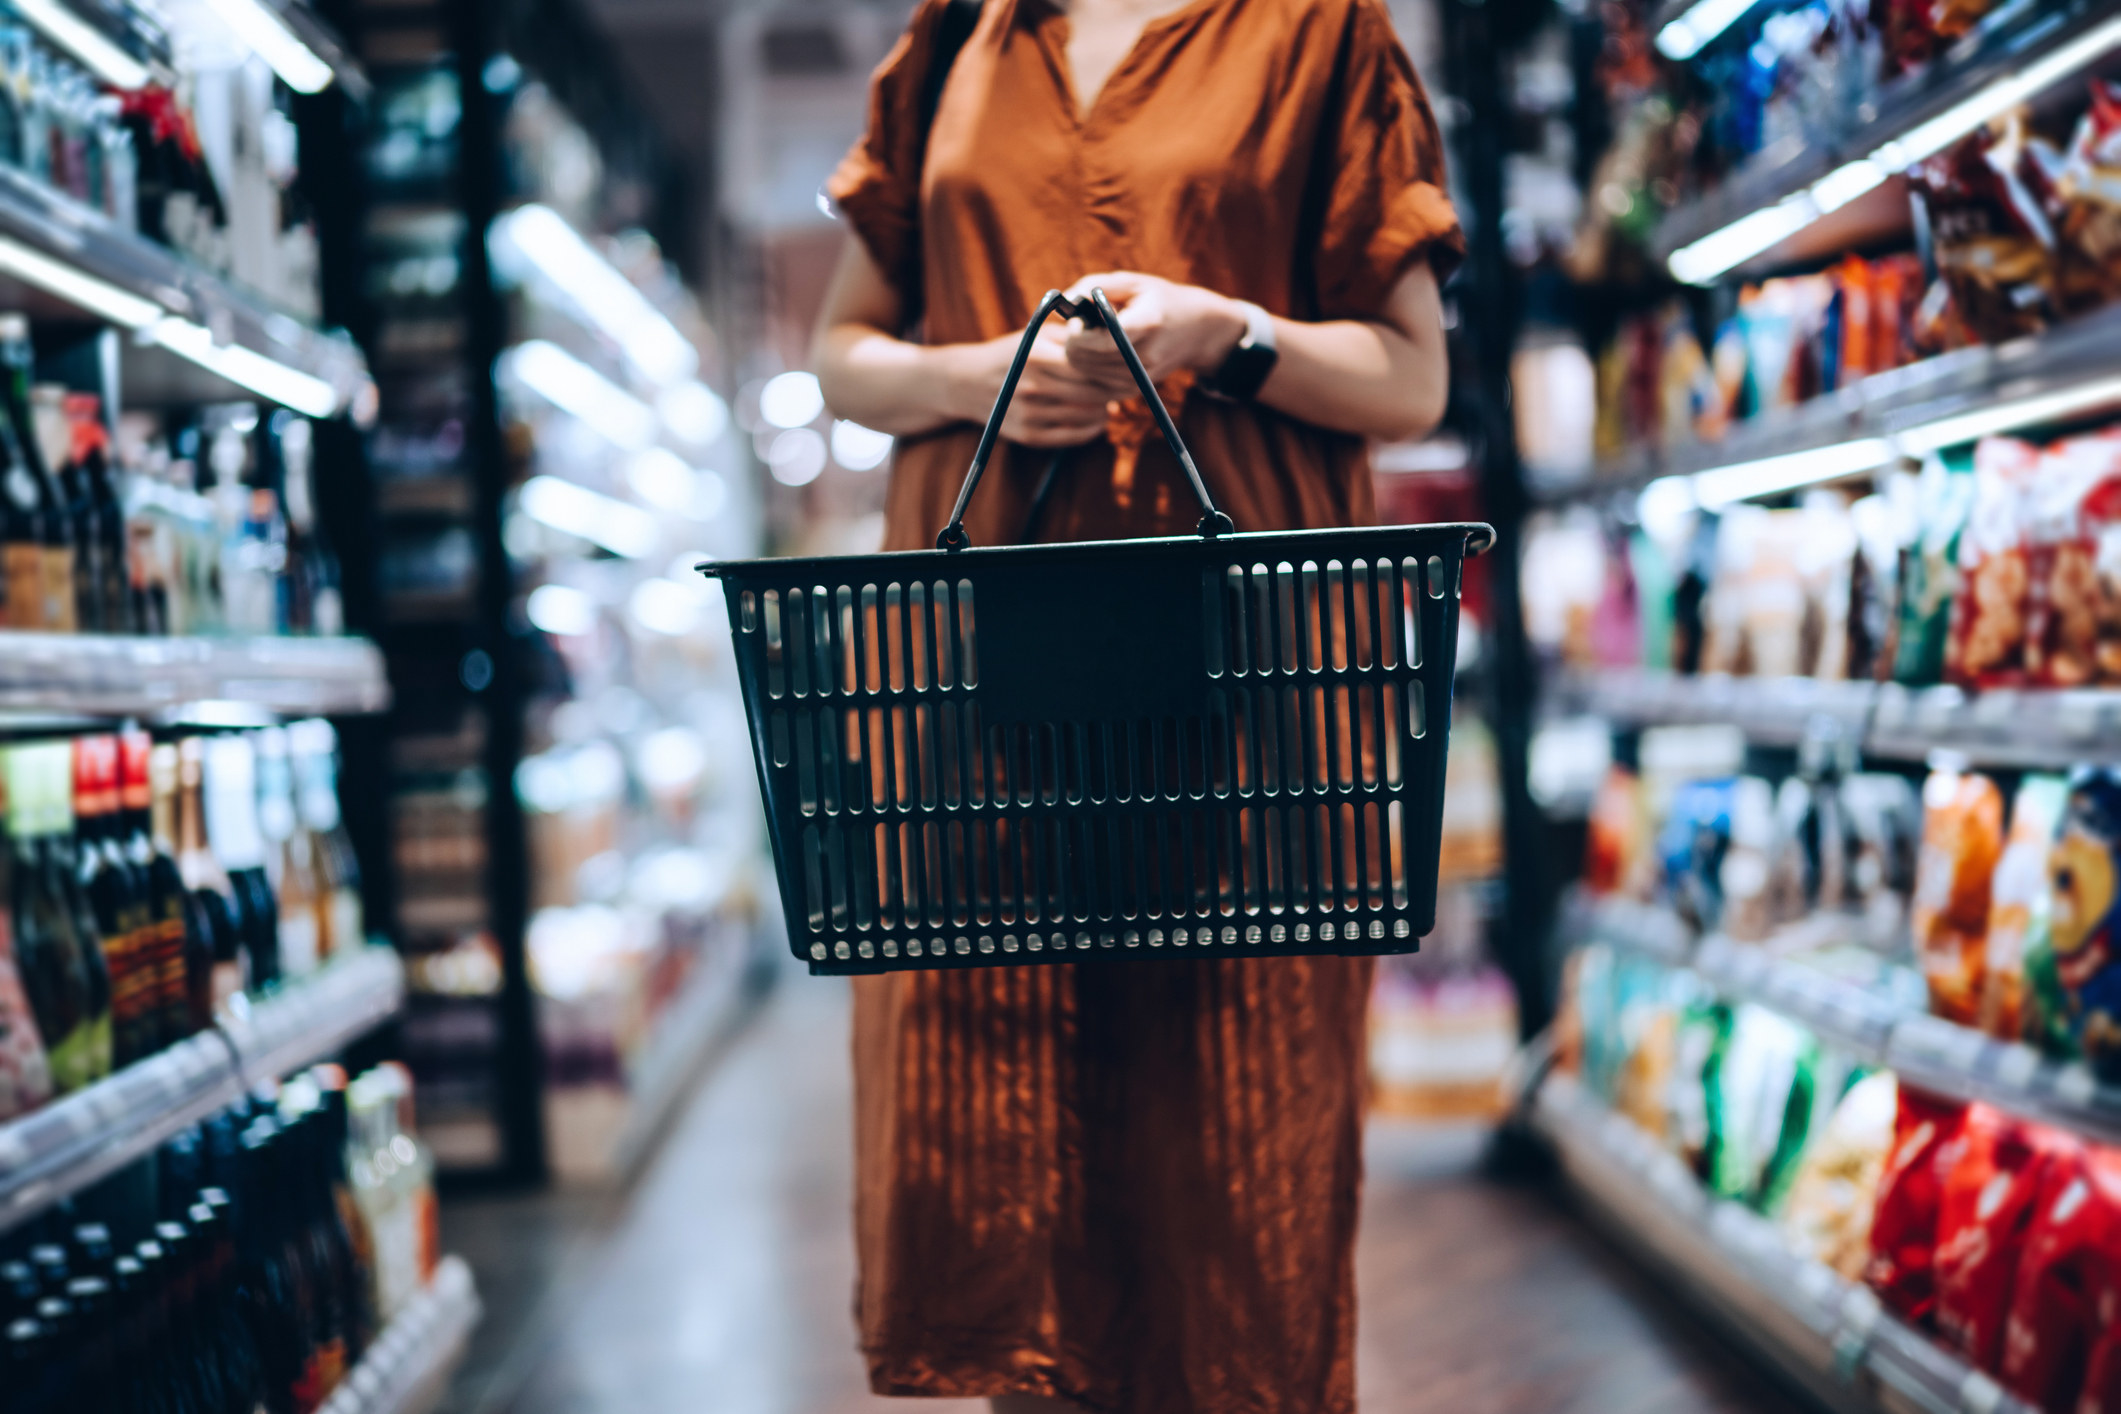 A young woman carrying a shopping basket in a grocery store